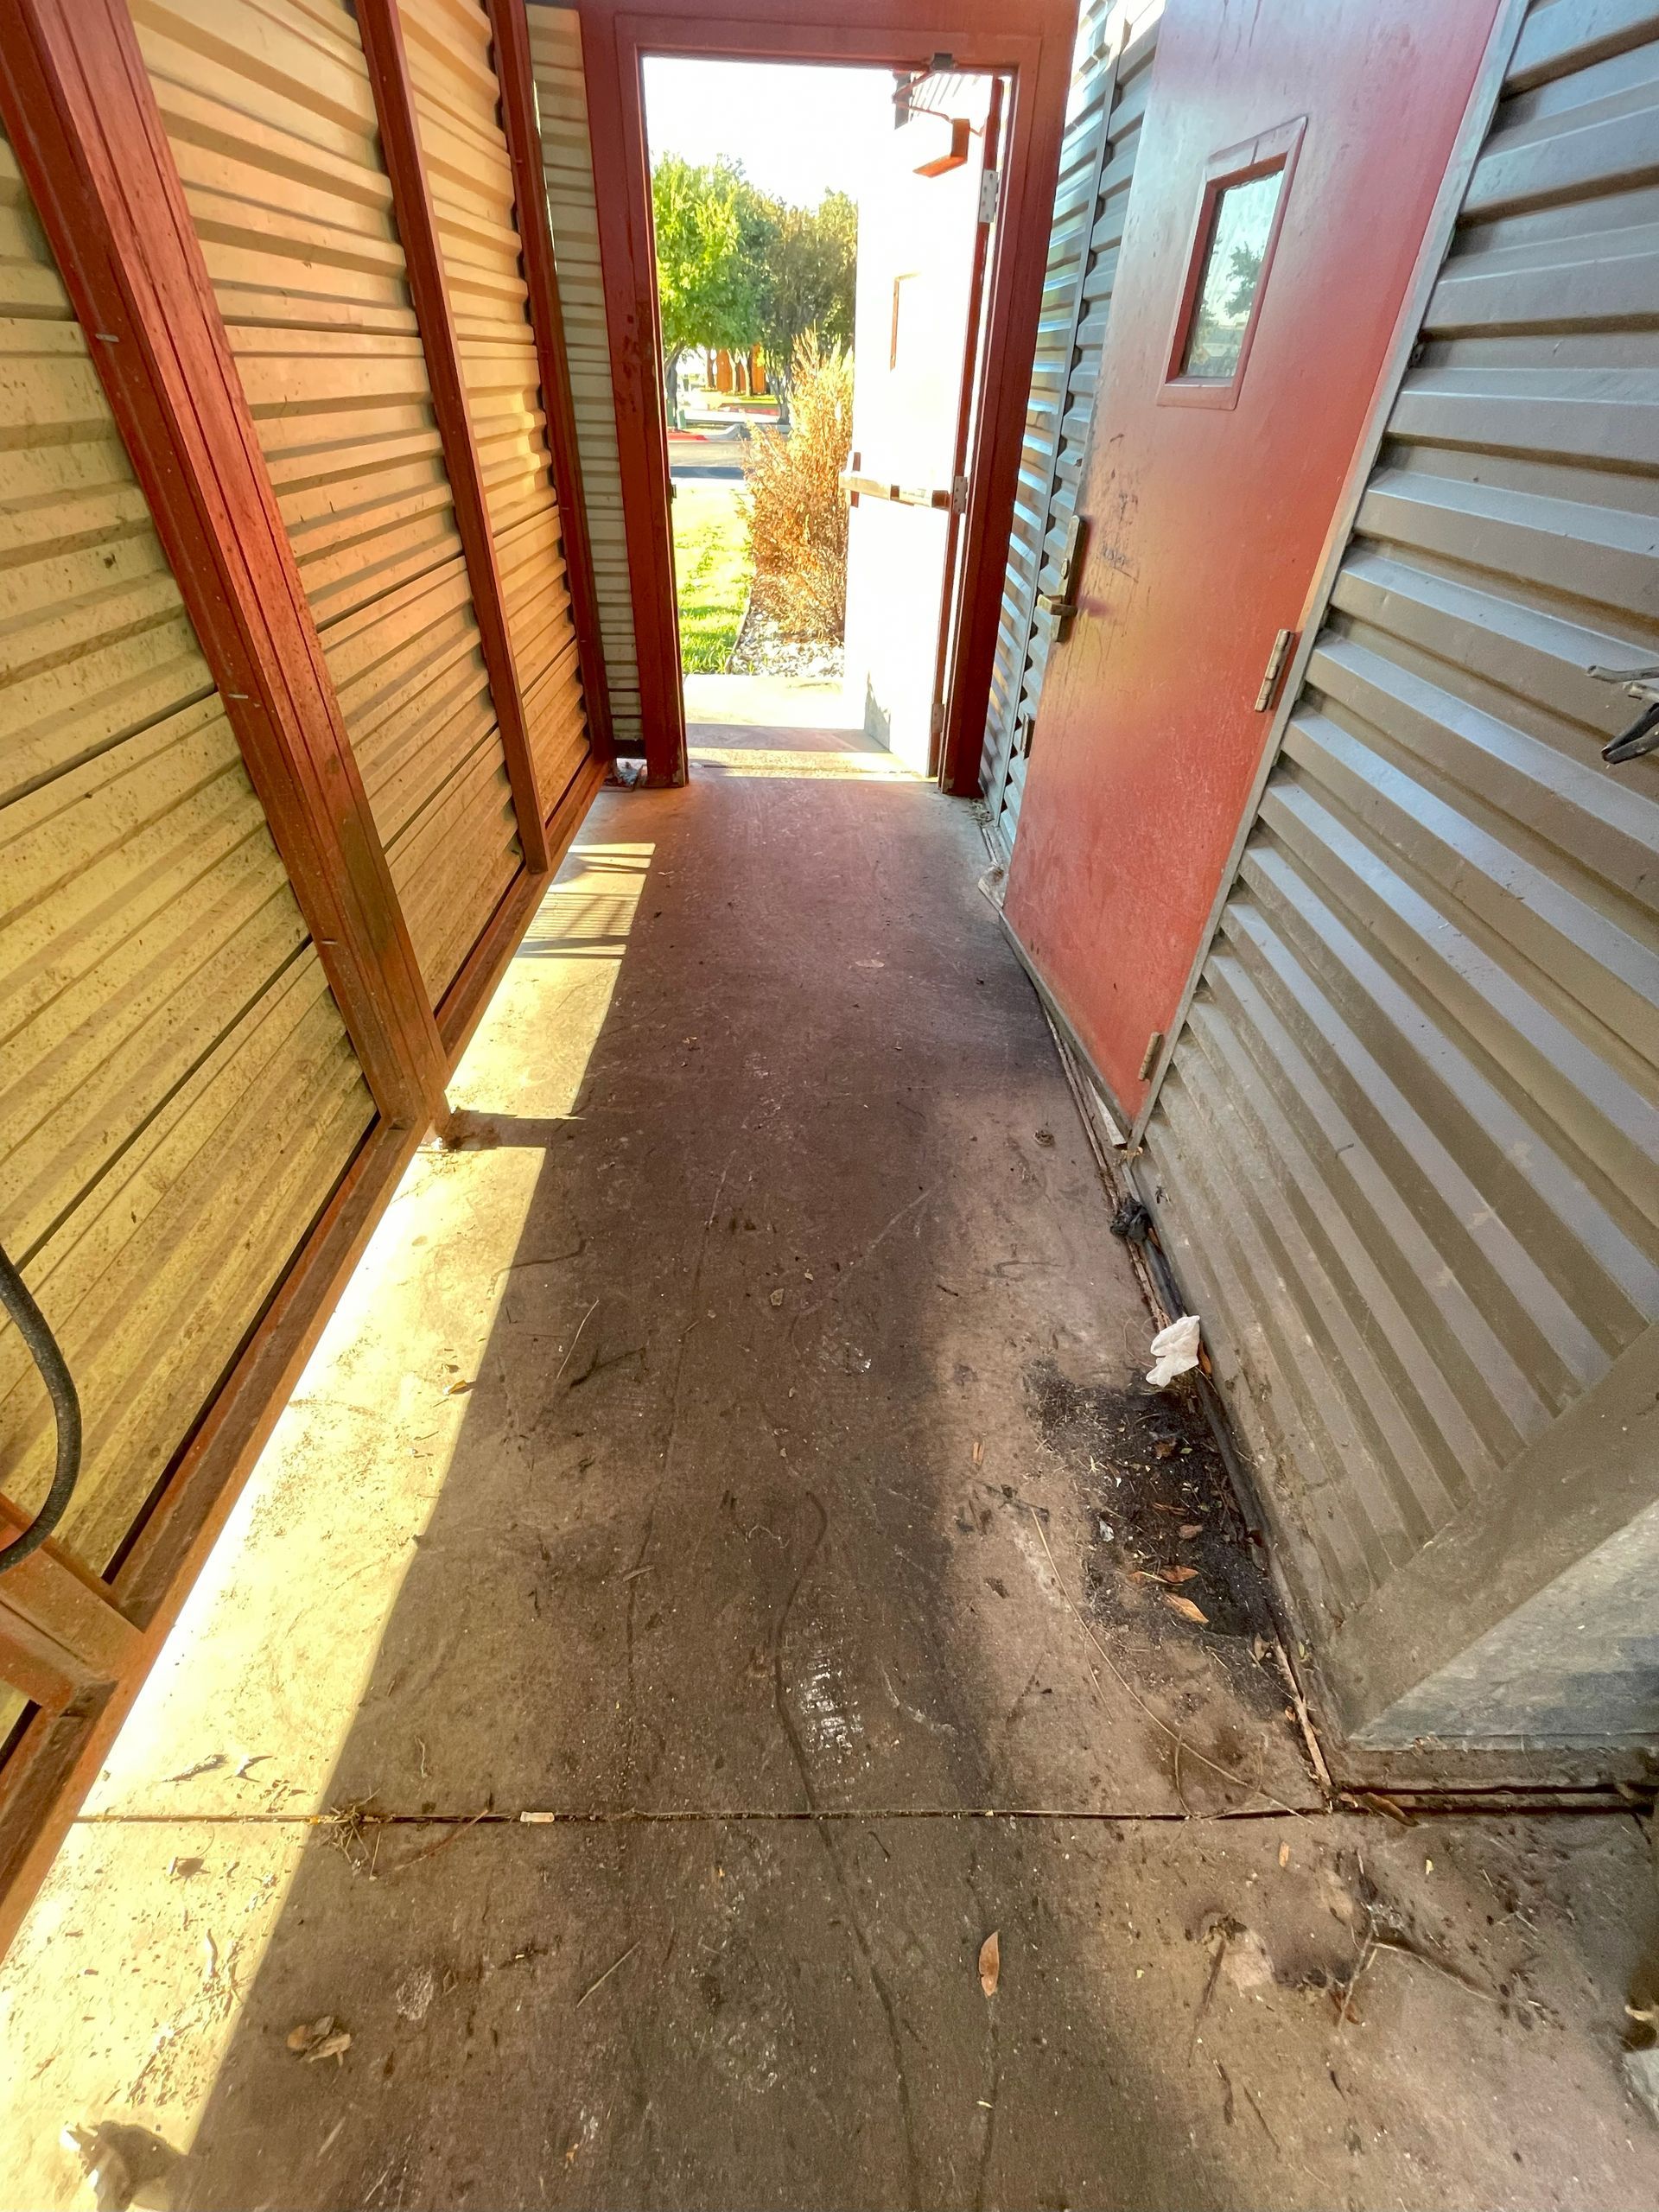 image of house concrete porch/garage before washing